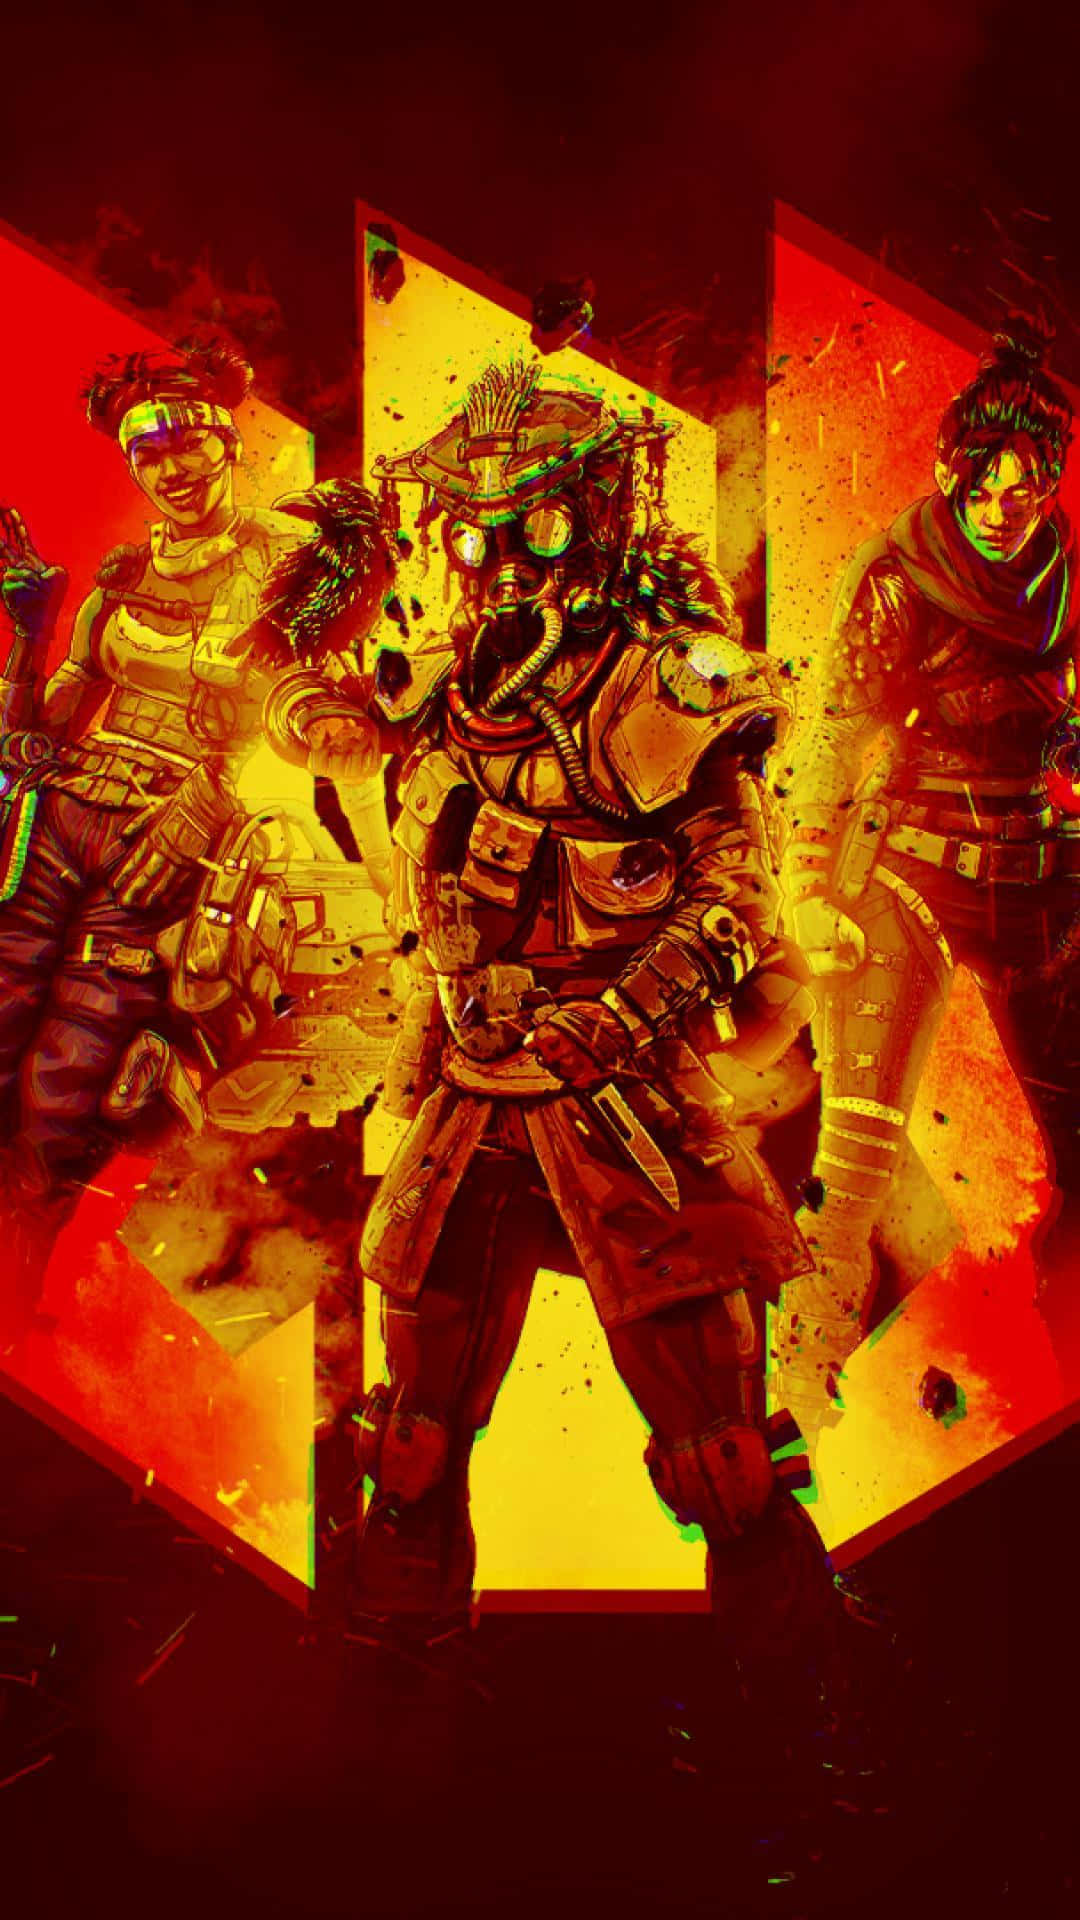 Conquer the competition with Apex Legends' Bloodhound. Wallpaper